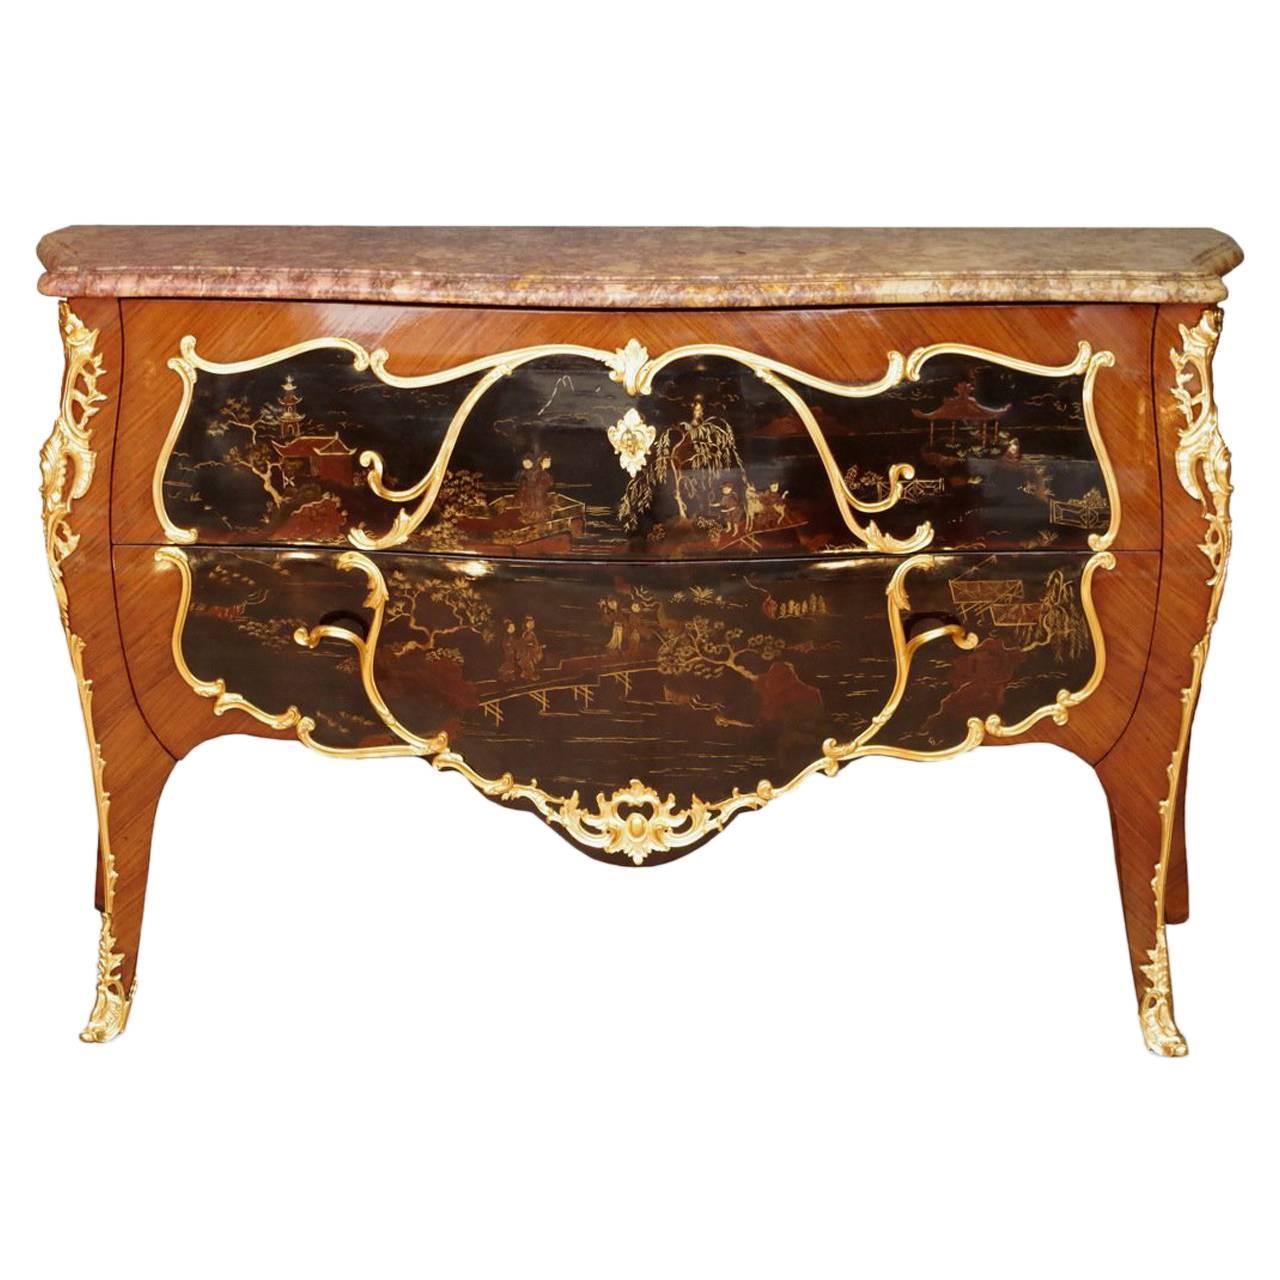 Louis XV Style Maquetry and Chinese Lacquer Type Commode, circa 1900